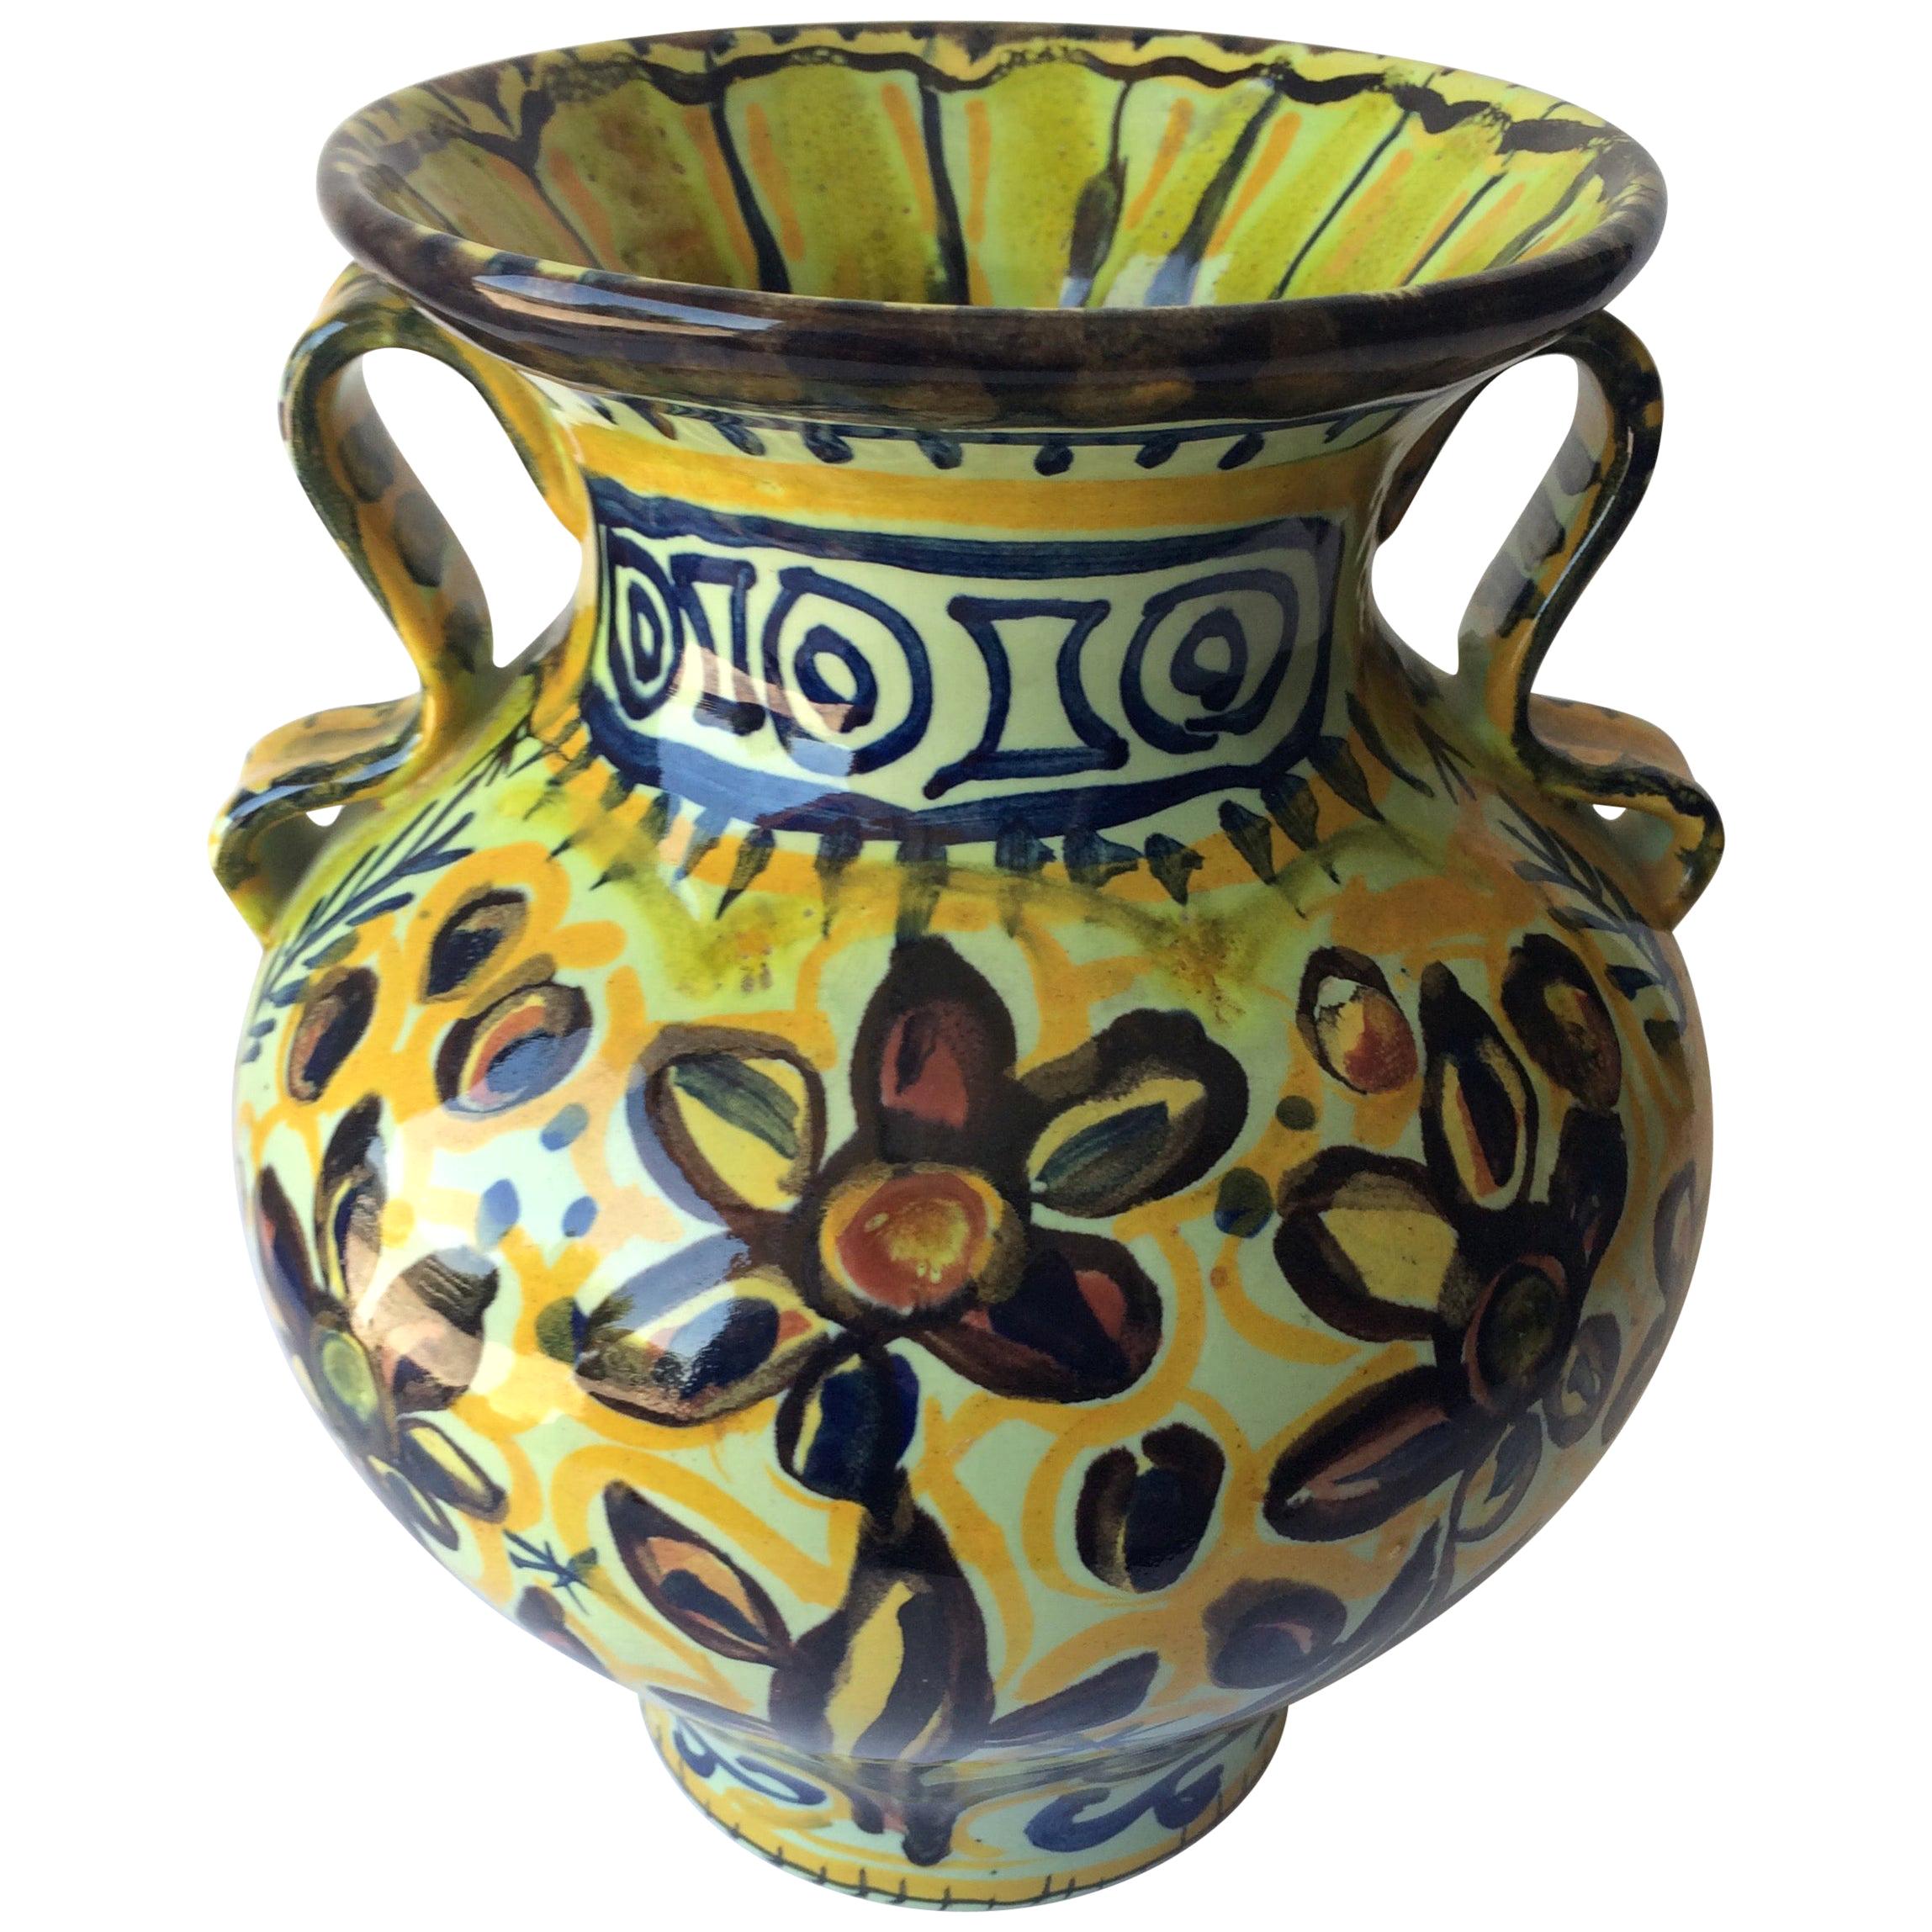 French Ceramic Vase with Handles from Quimper, France by Keraluc Pottery Studio